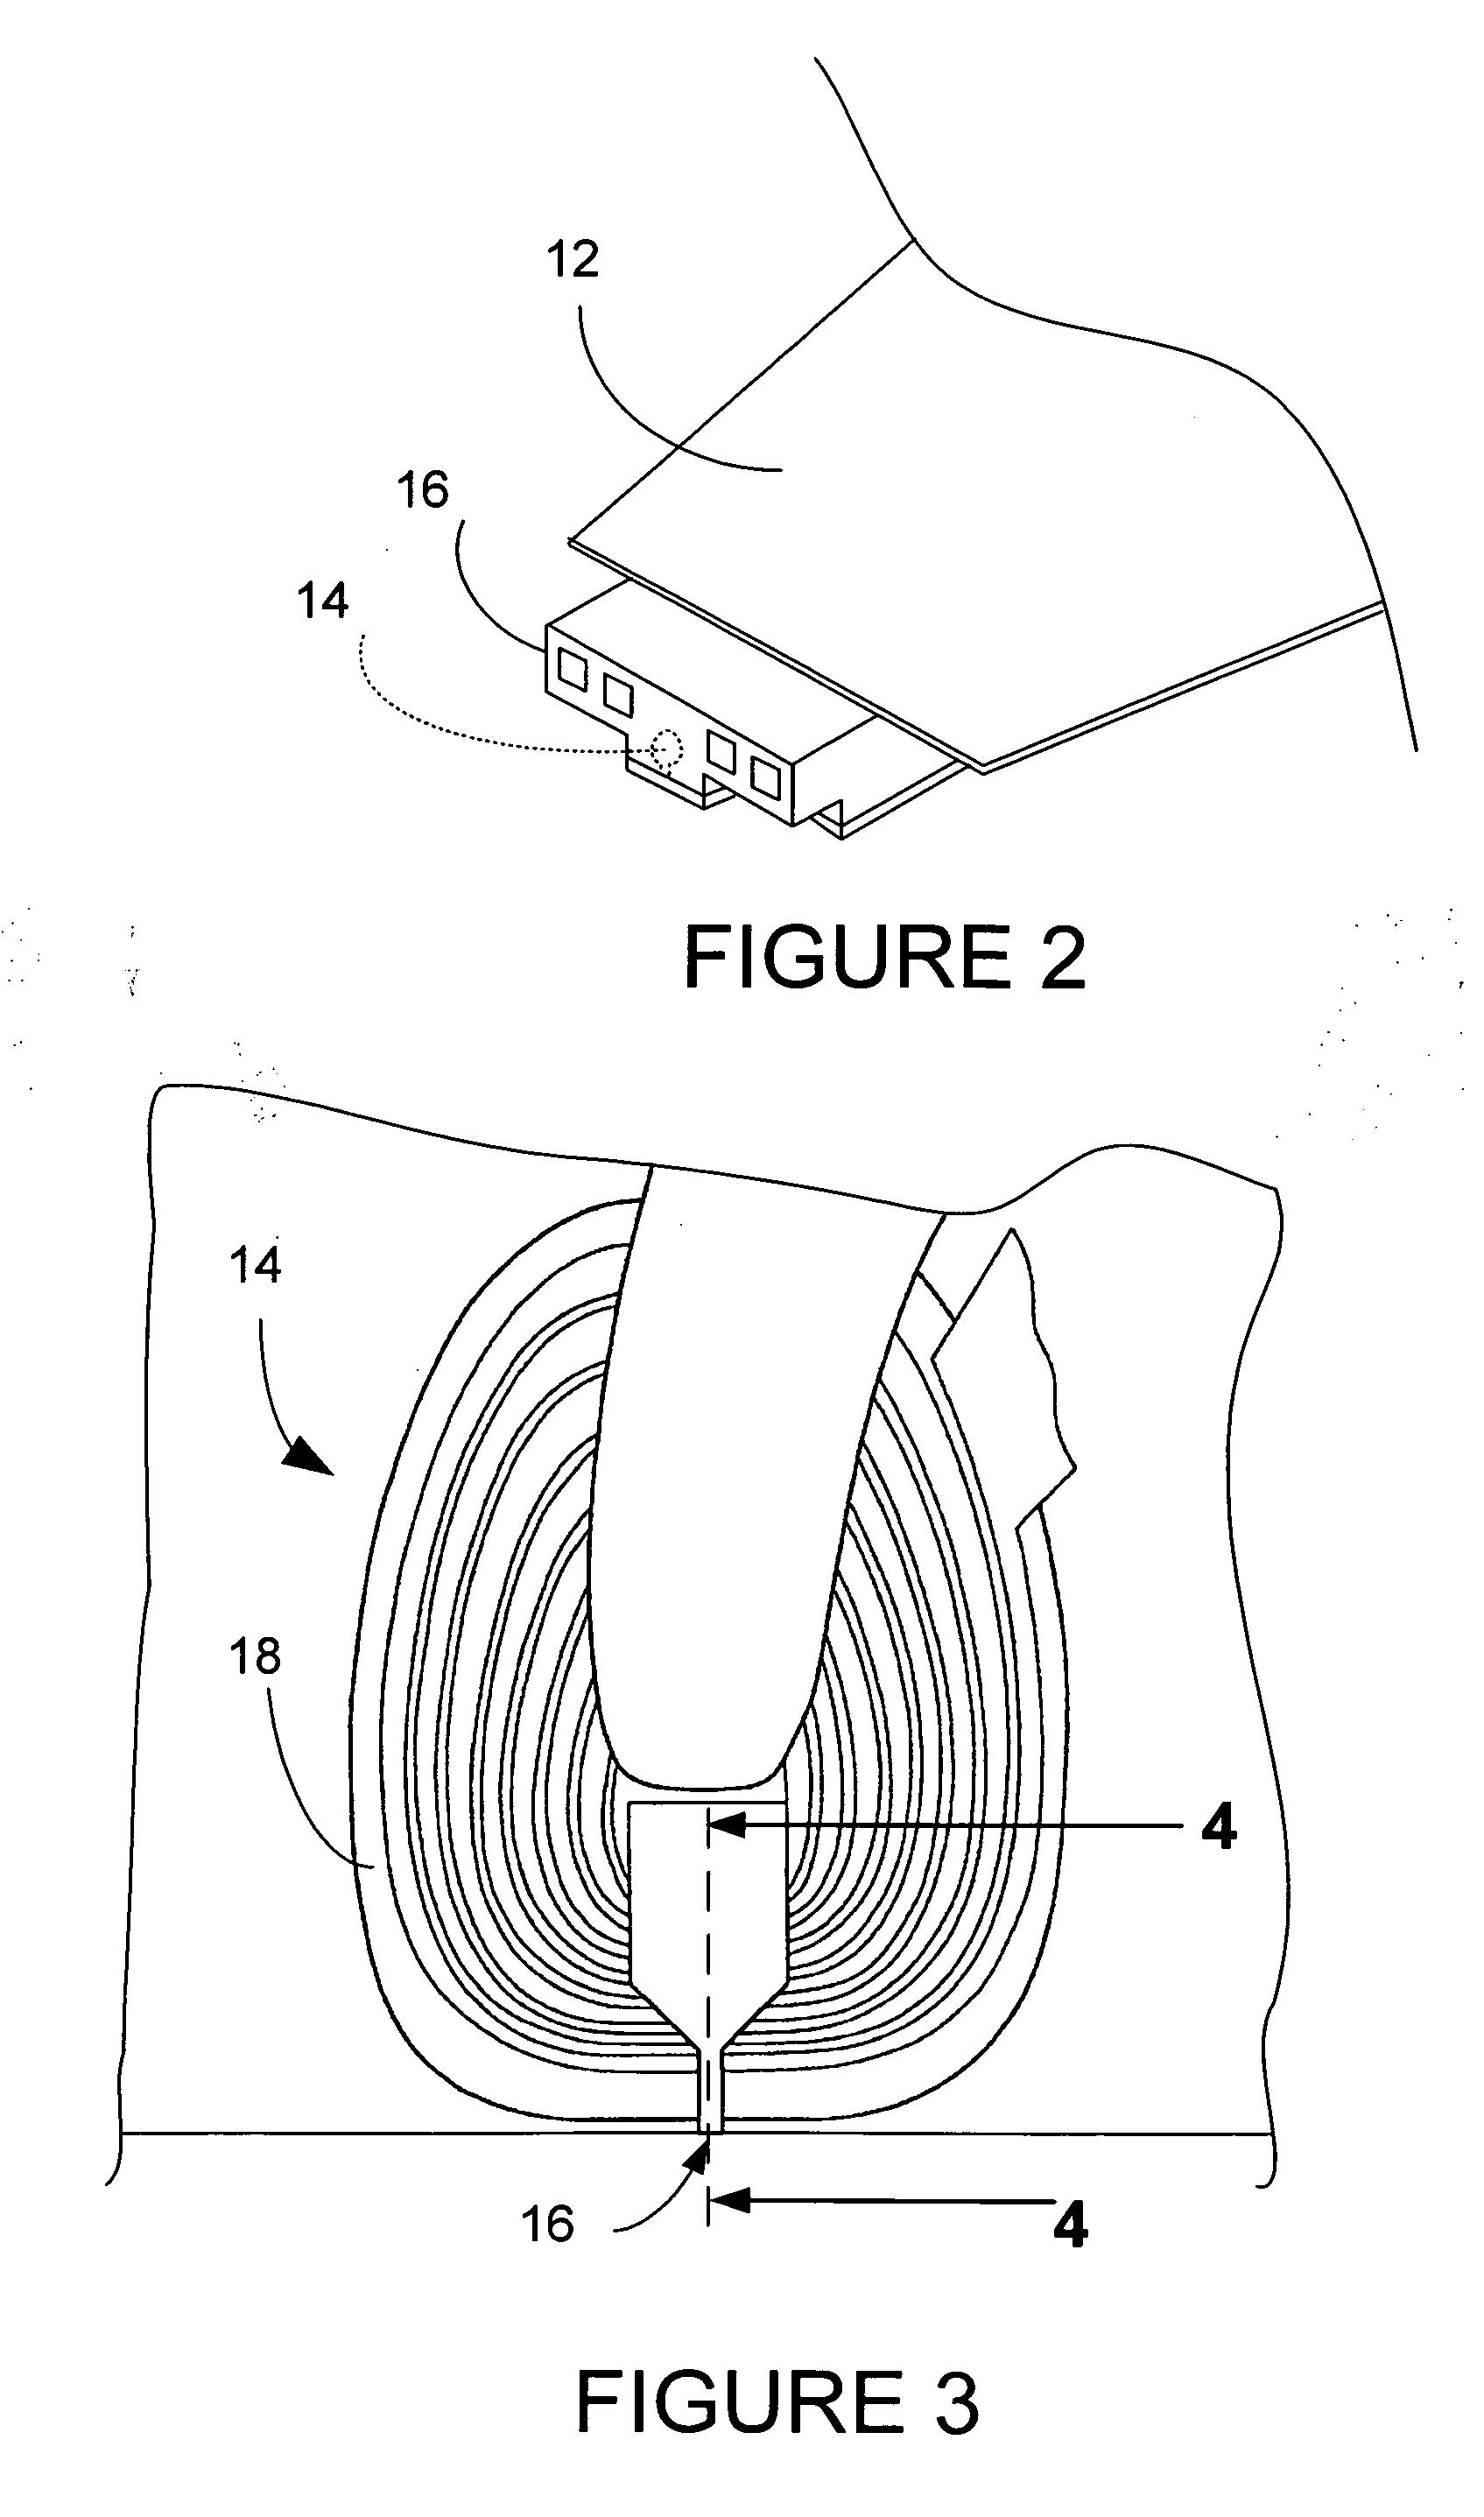 P1 write pole with shoulder formation and method of fabrication